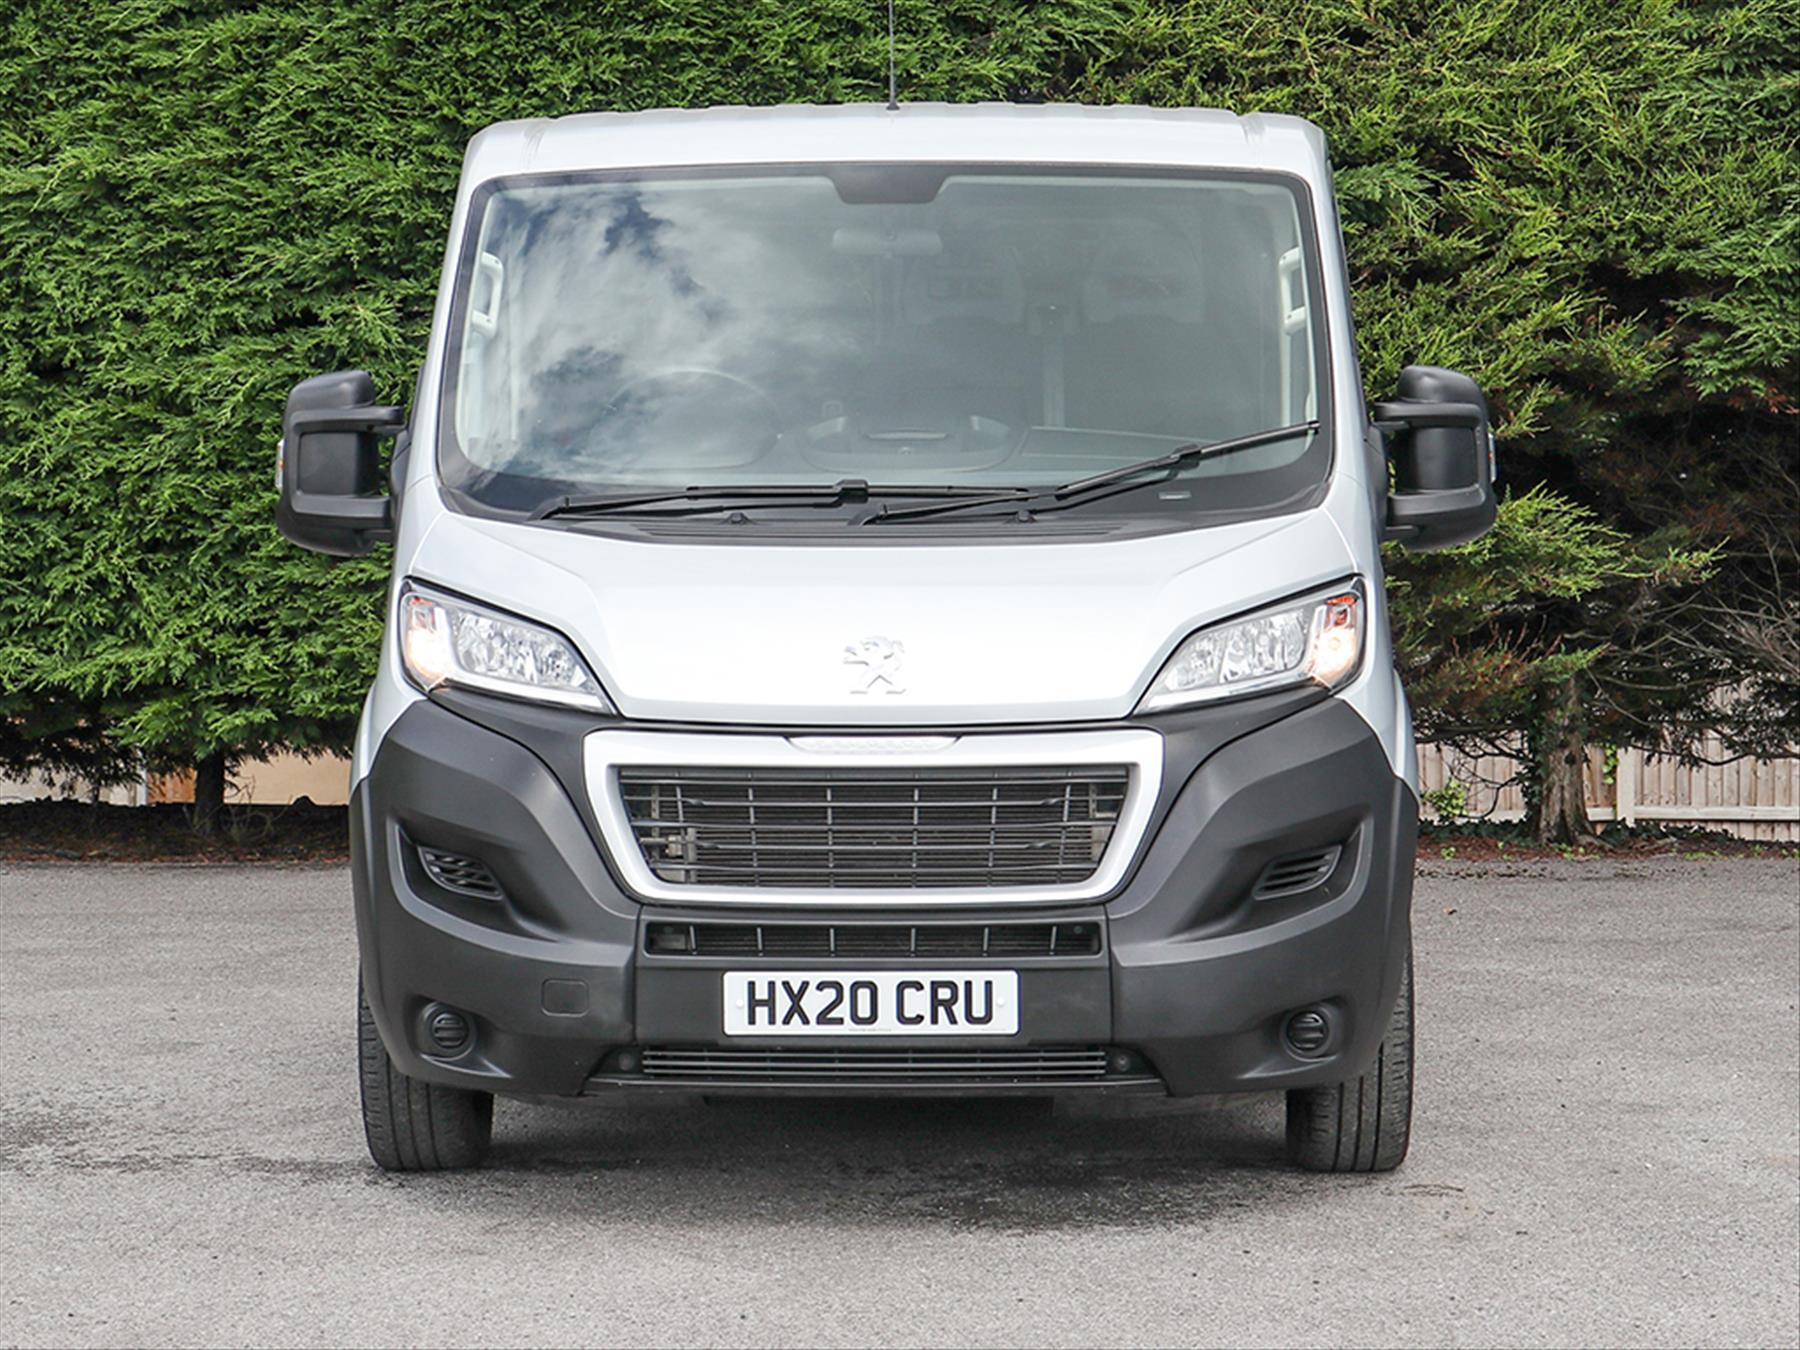 peugeot boxer germany used – Search for your used car on the parking